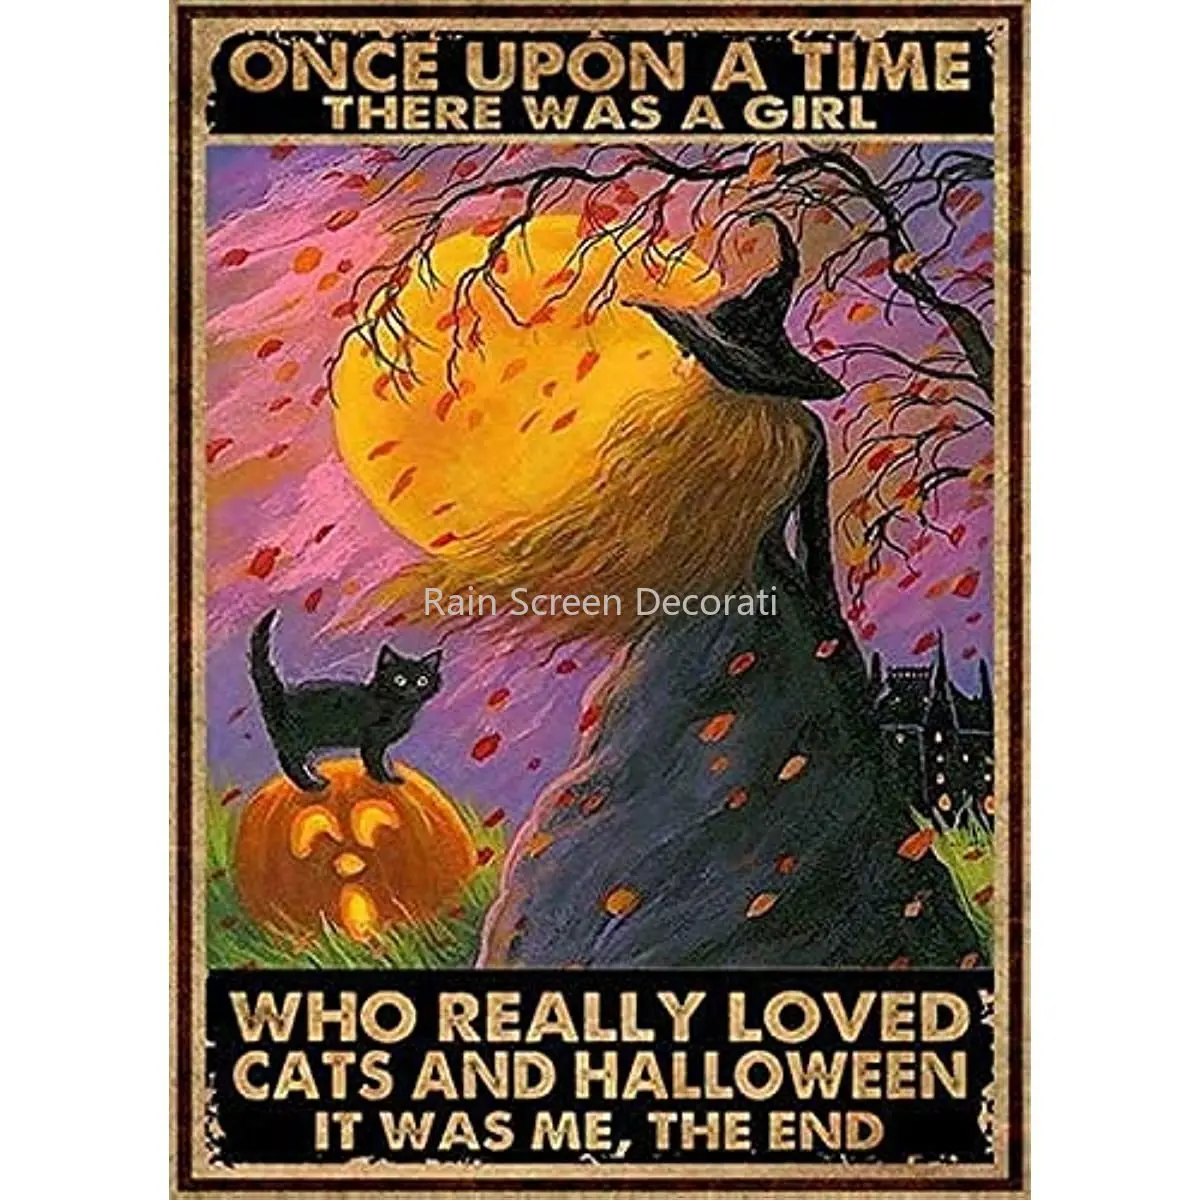 

Vintage Style Halloween Tin Sign with Black Cats and witch for Wall Decor in Study or Bar Area, Farmhouse Home Decor Posters